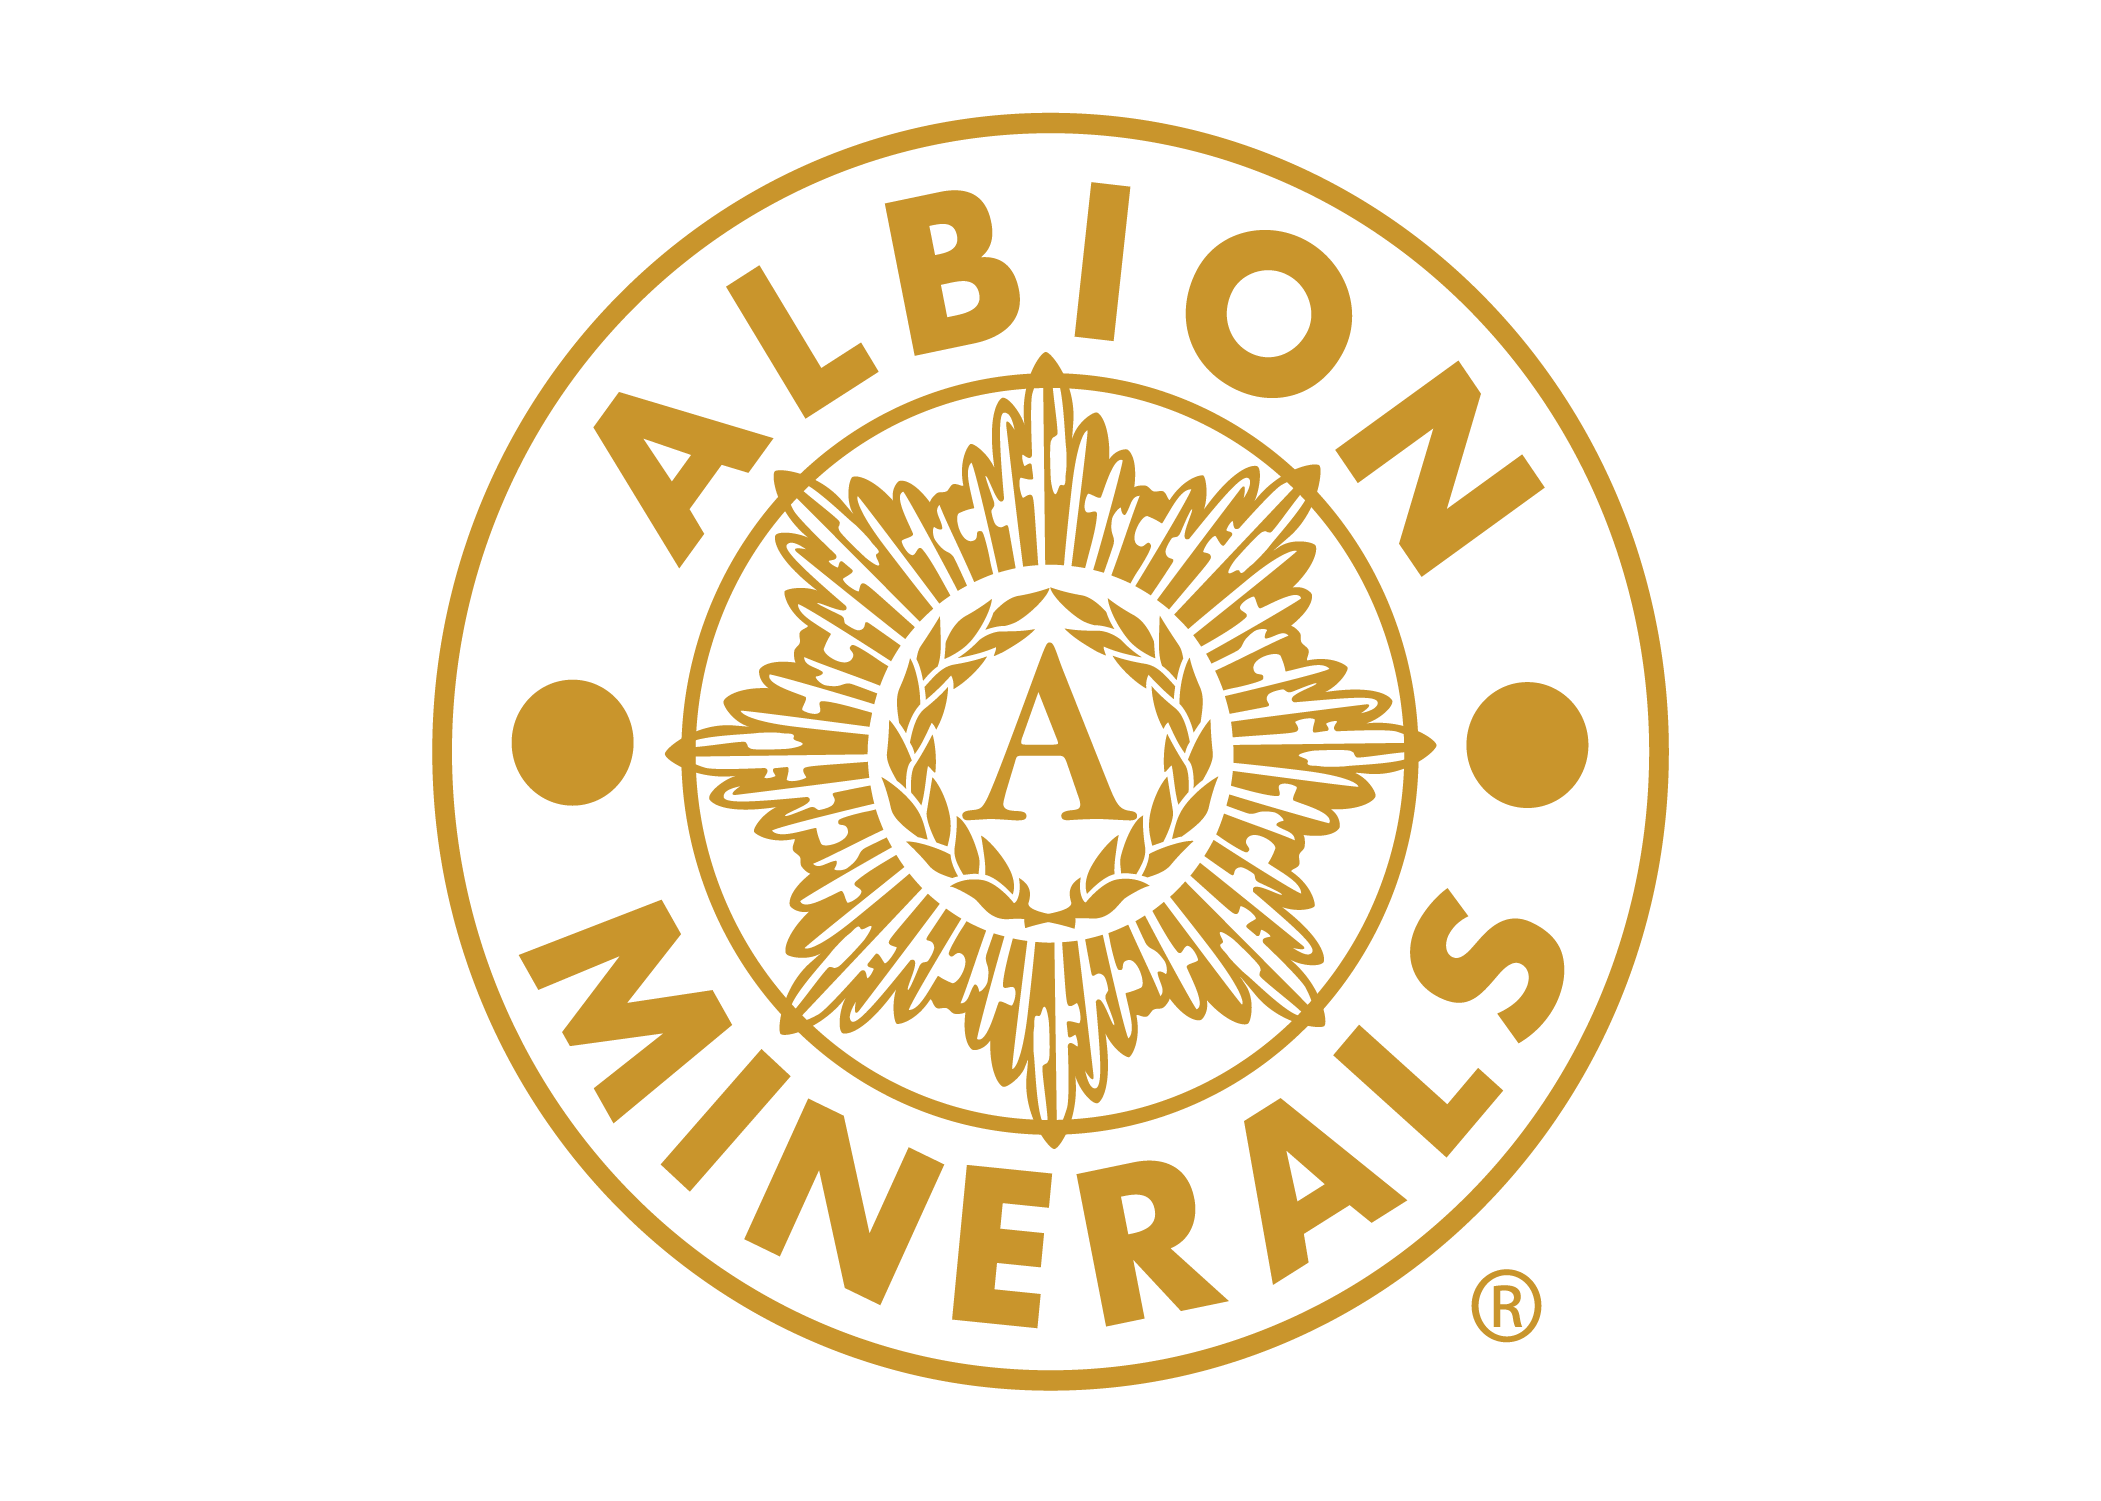 Albion minerals seal